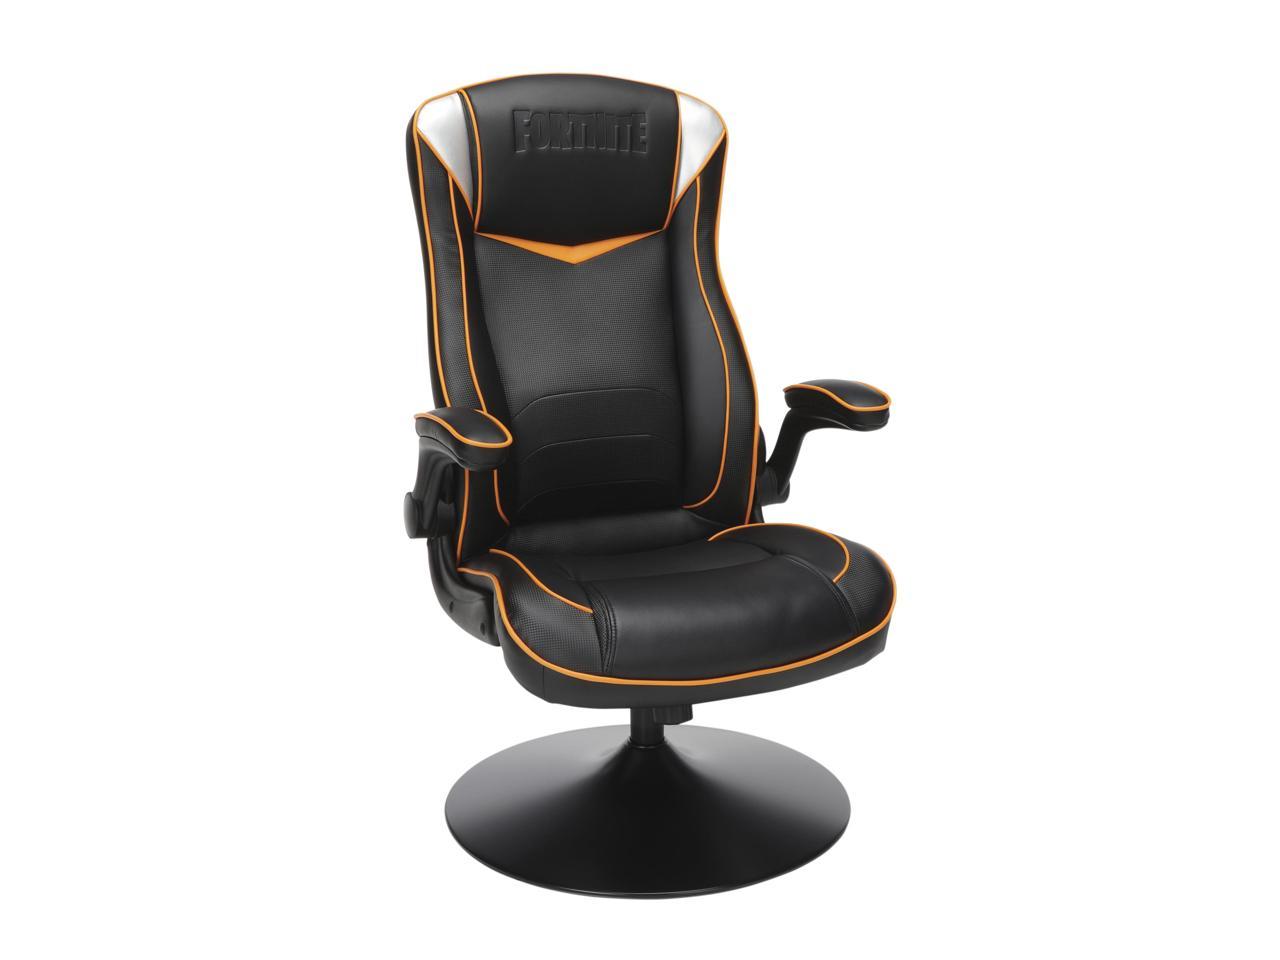 Fortnite OMEGA-R Gaming Rocker Chair, RESPAWN by OFM